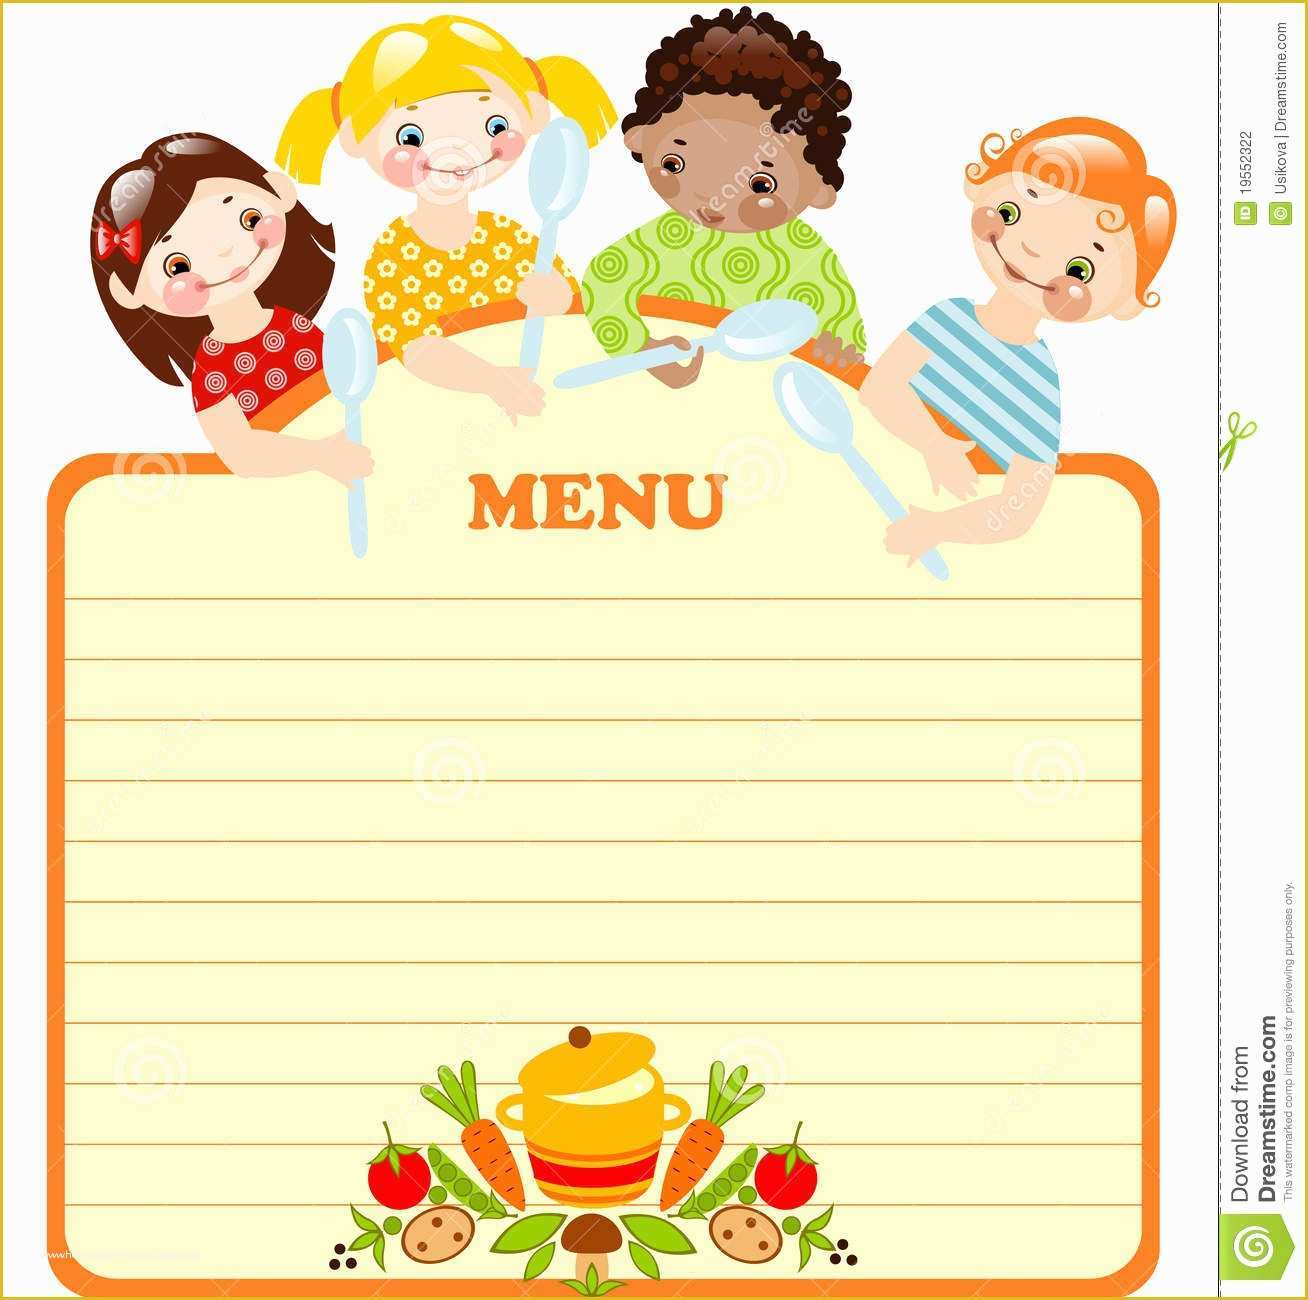 Free Kids Menu Template Of Funny Kids with Spoonsnu Stock Vector Illustration